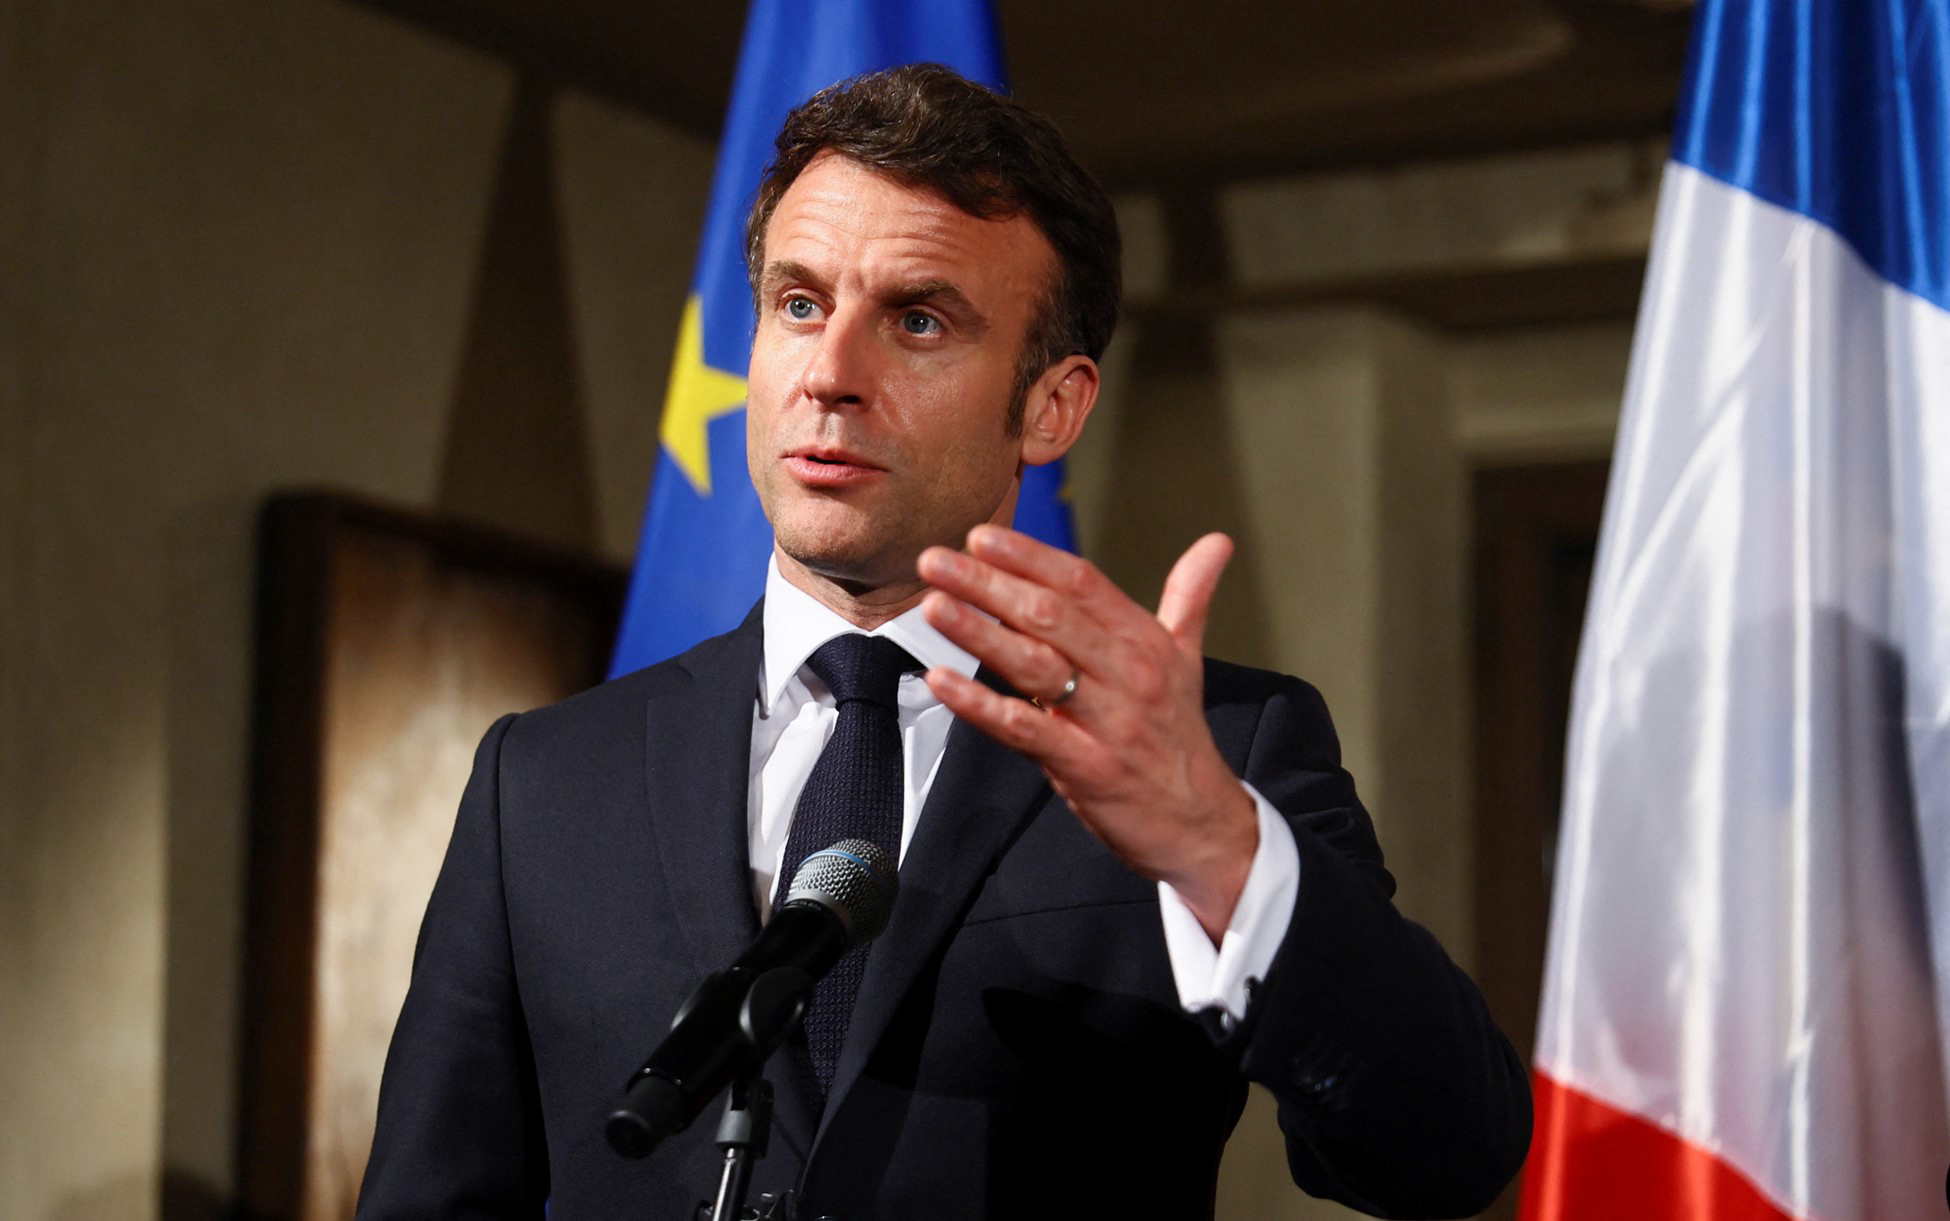 You are currently viewing Macron Set for Mission to Win Back Africa | The African Exponent.